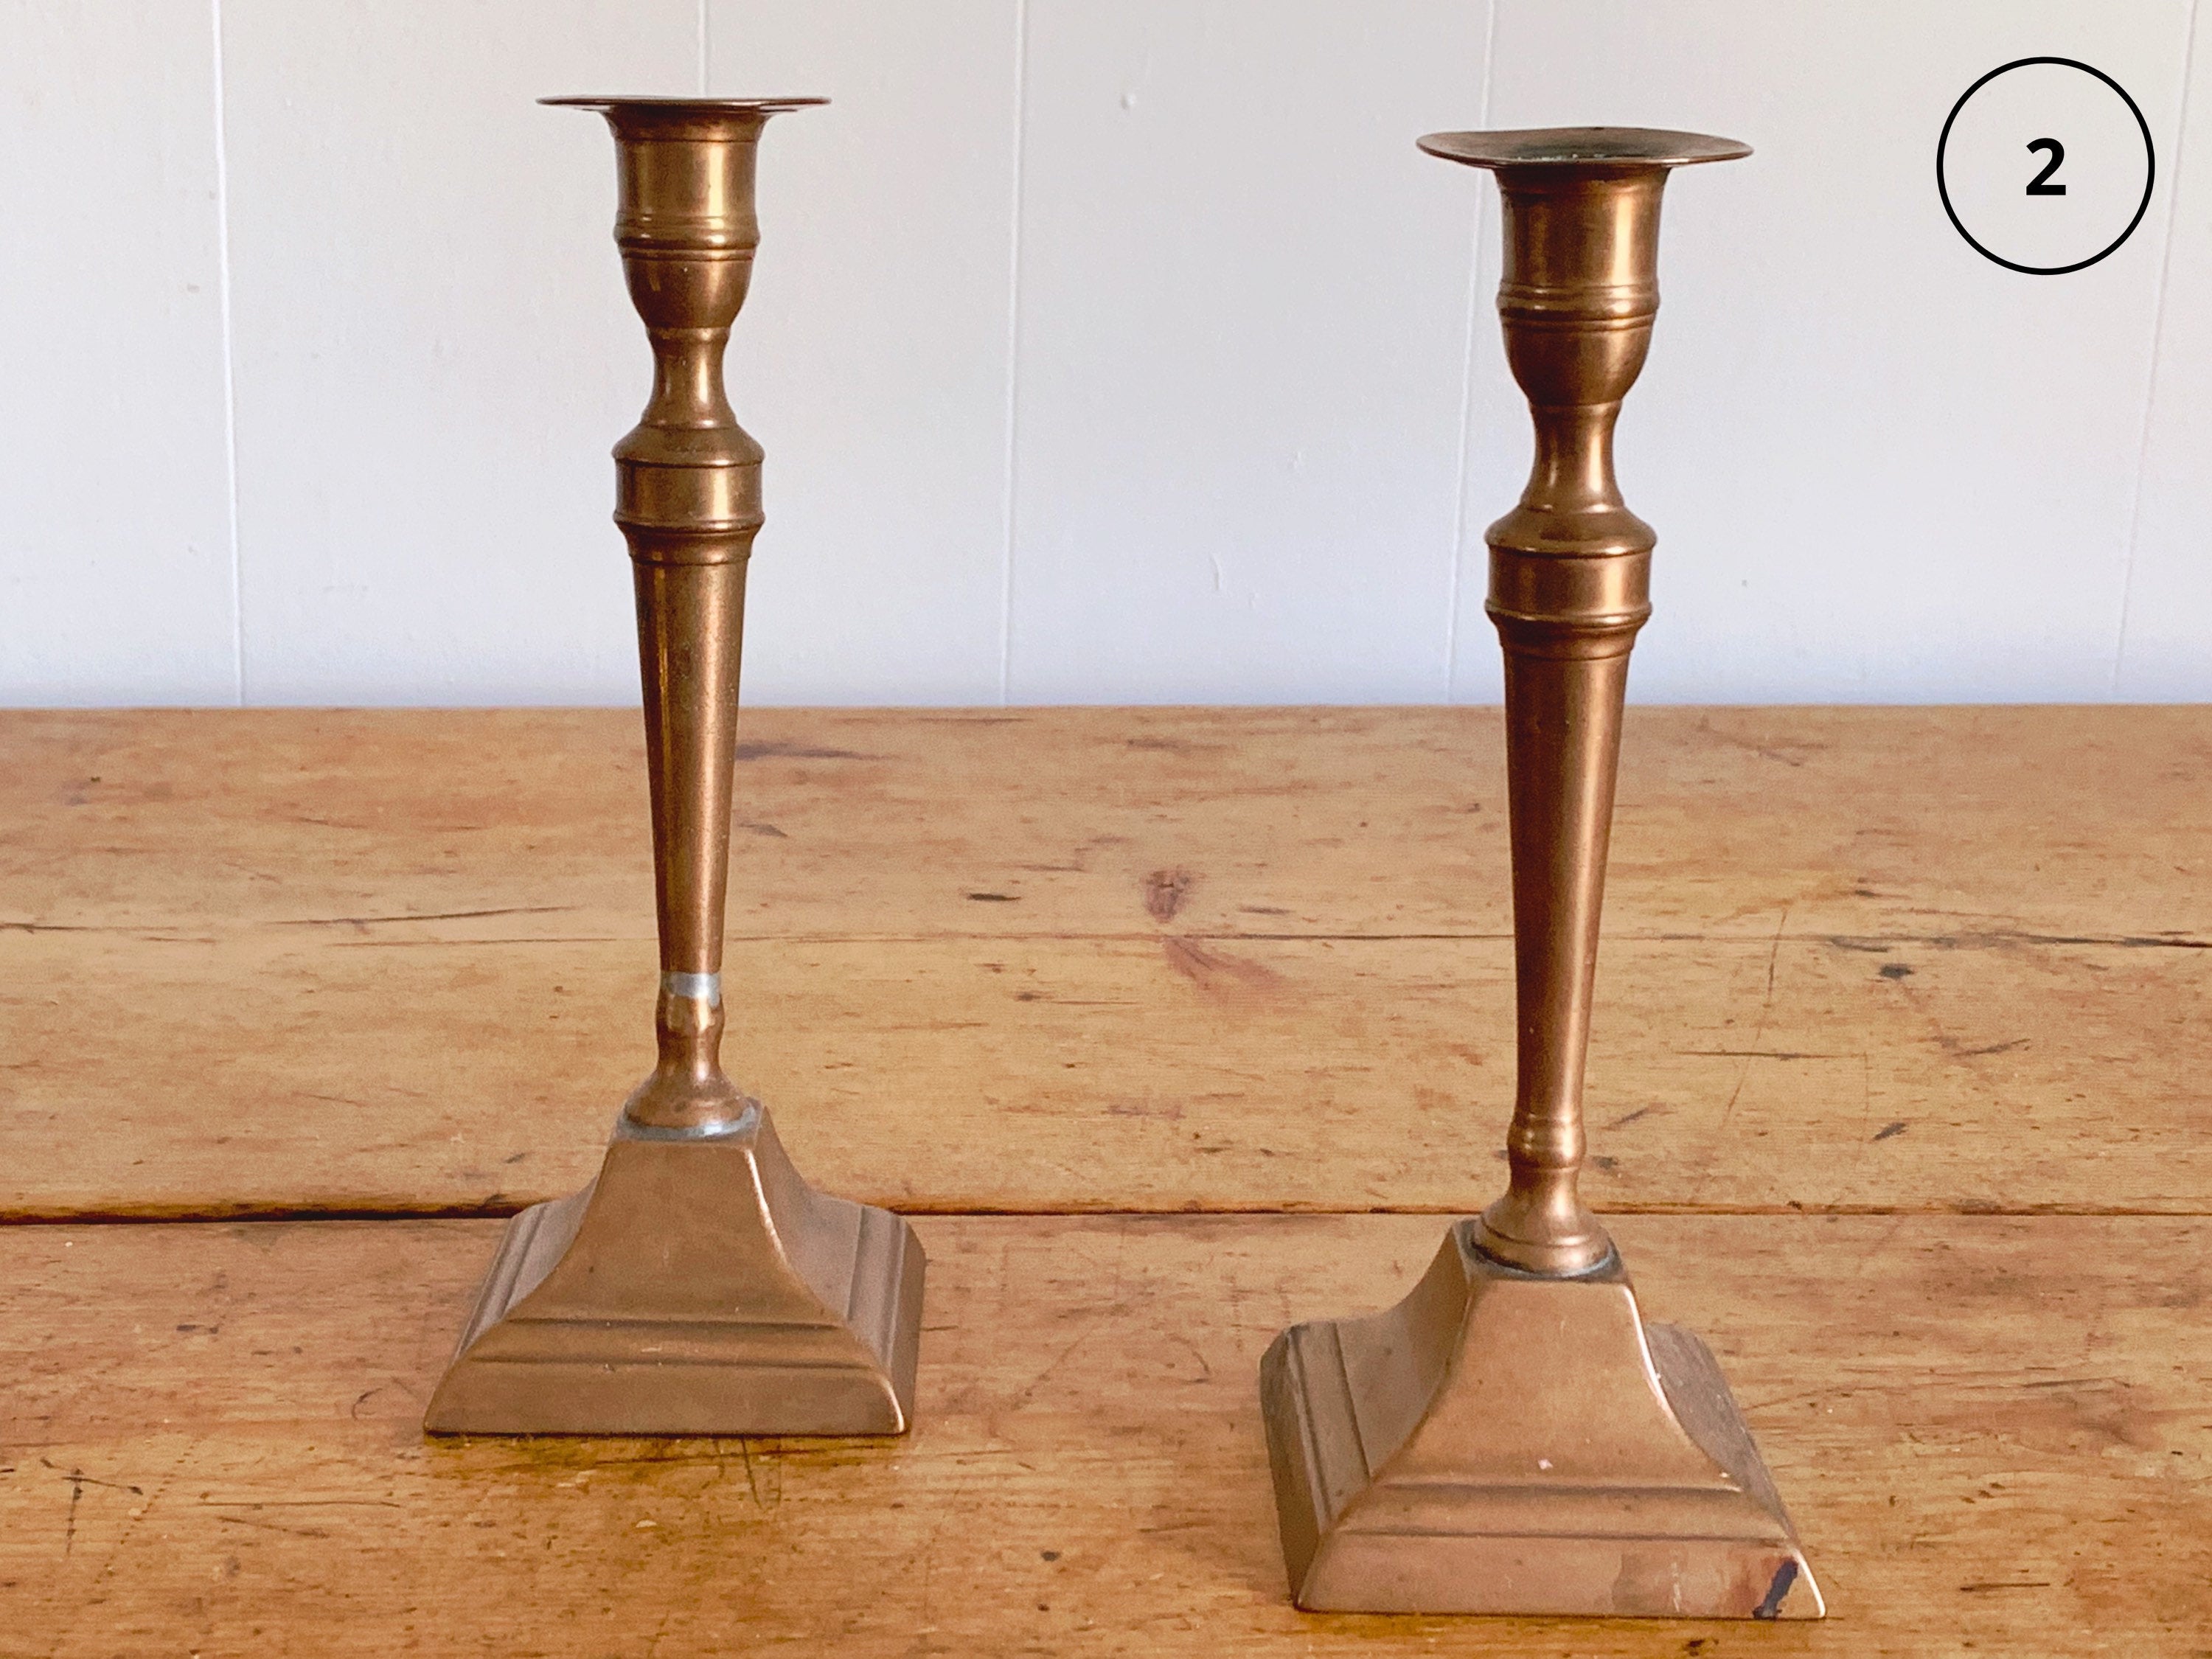 NEW STYLES ADDED! Assorted Pairs of Vintage Brass and Copper Taper Candlestick Holders and Long Candle Snuffer | Farmhouse Home Decor